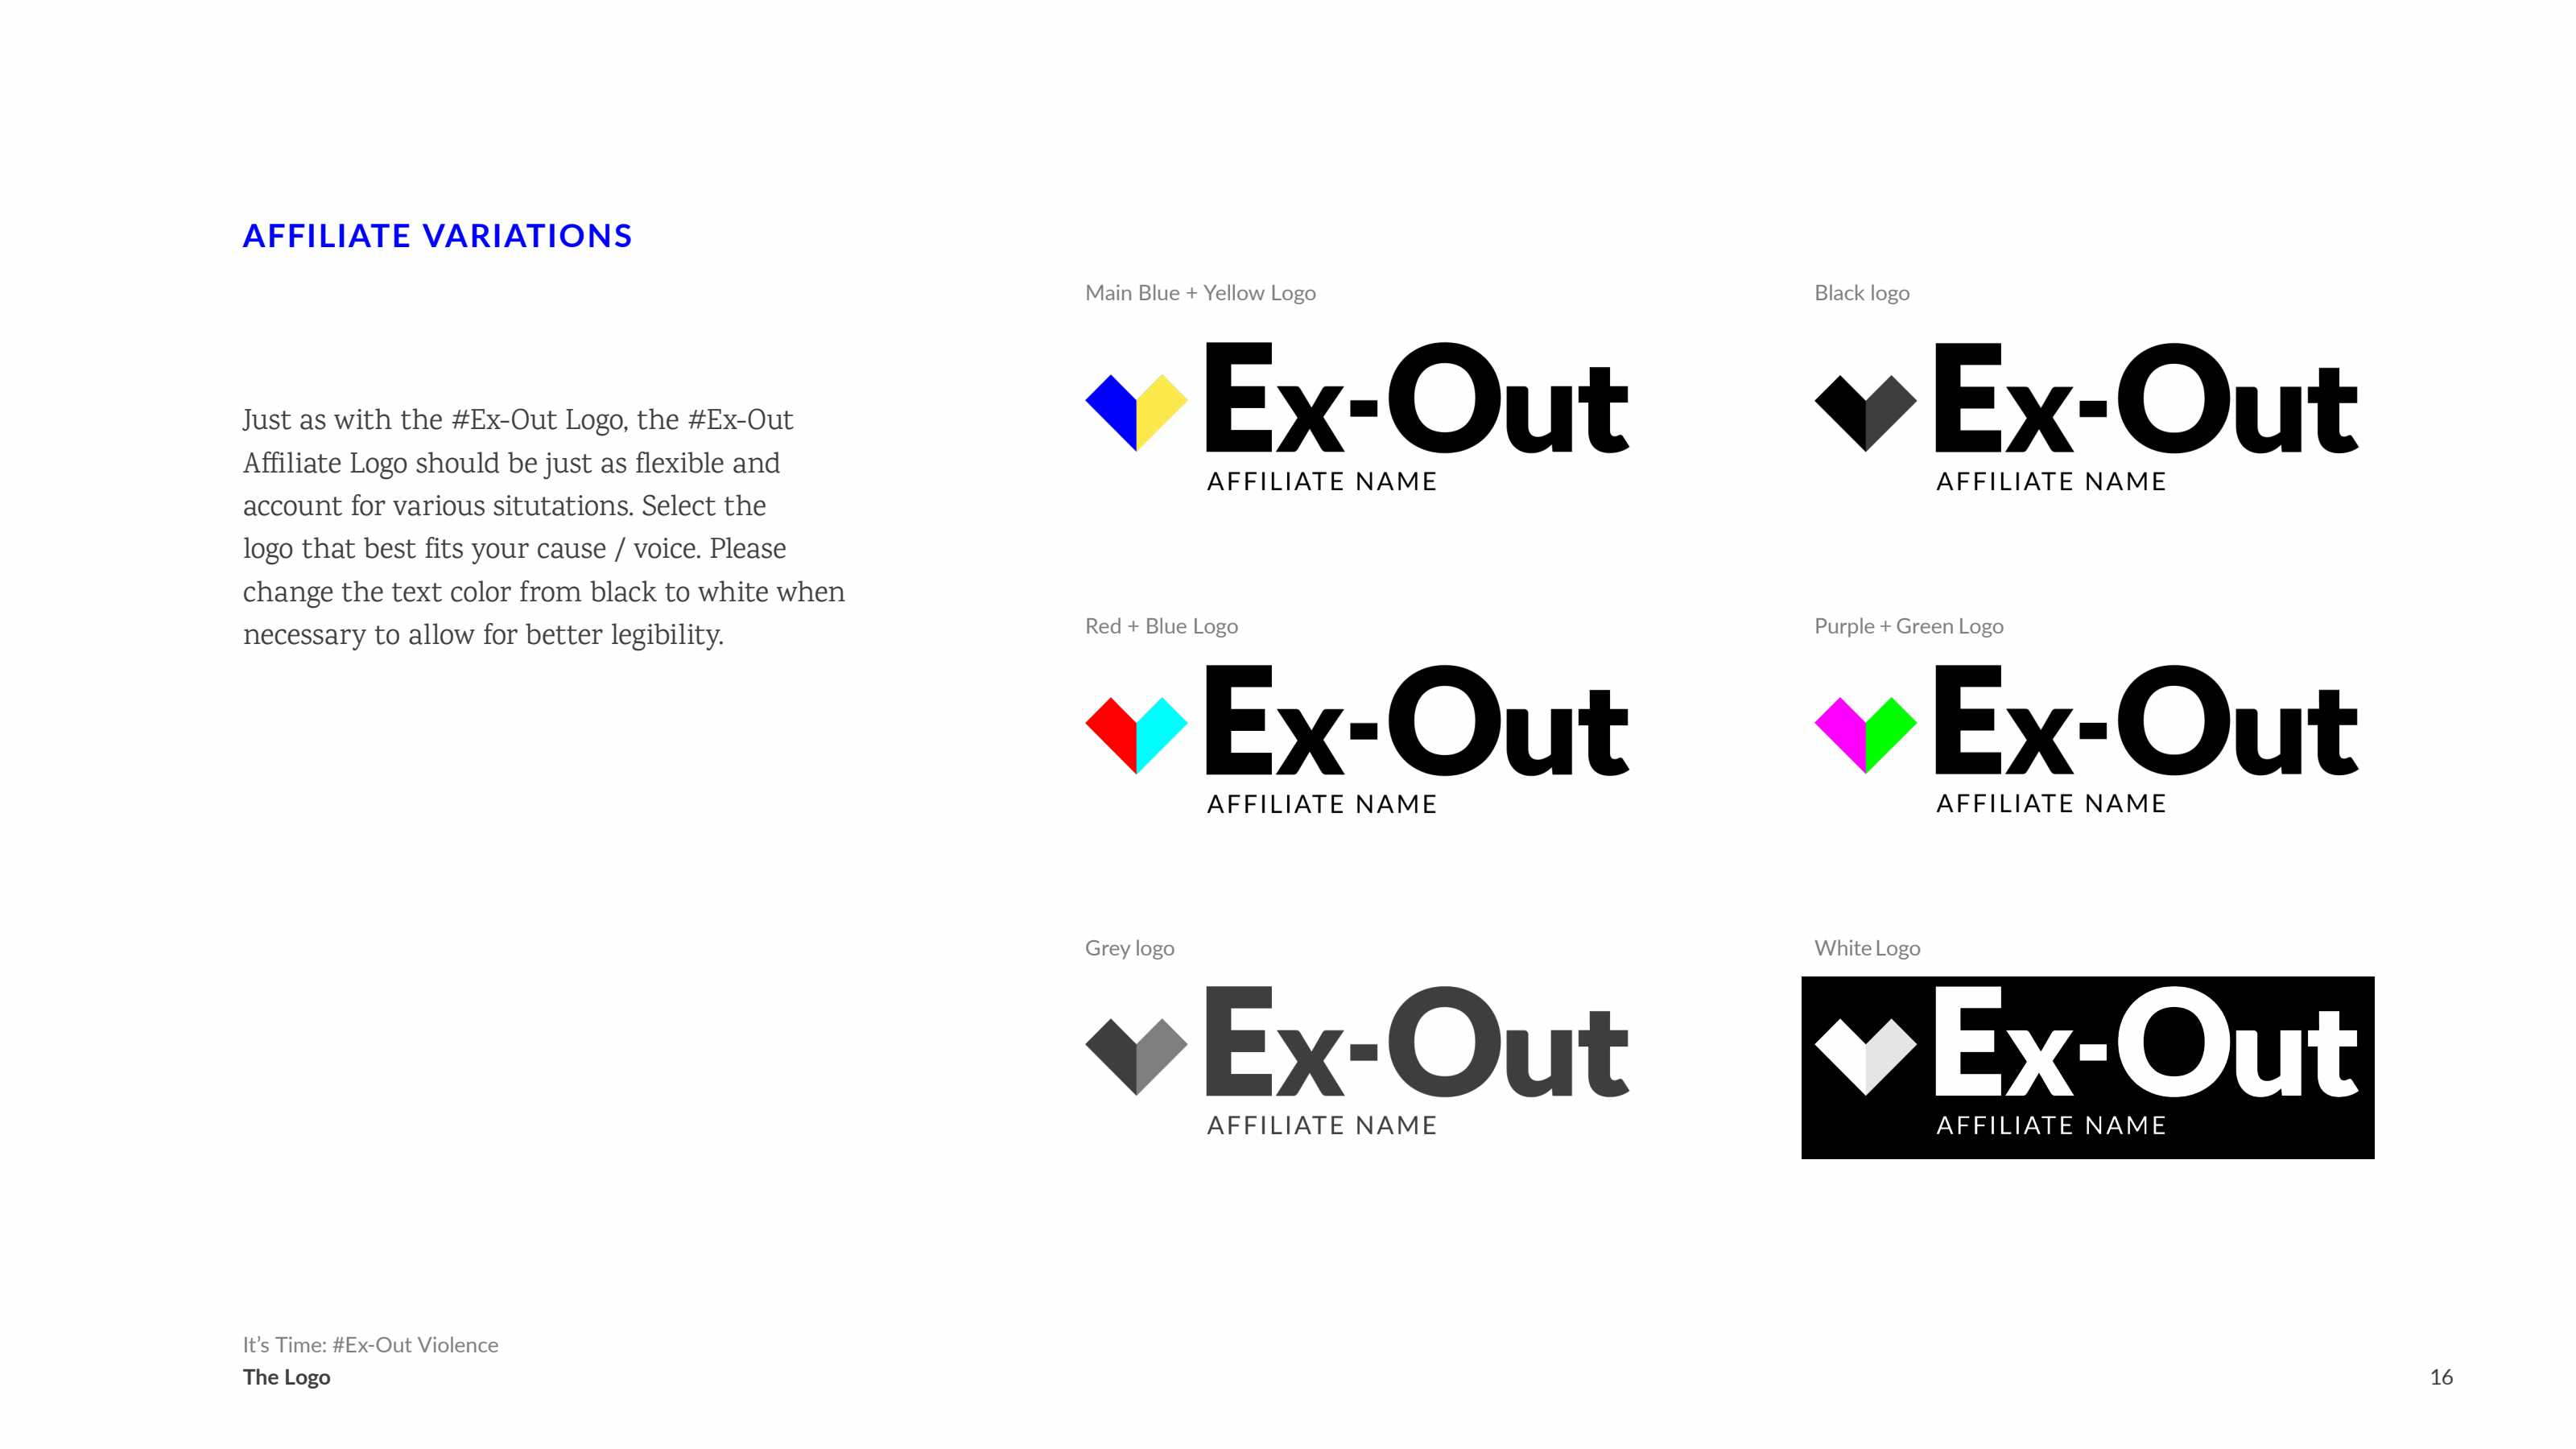 Ex-Out Brand Guide Page 16. Please download the PDF for an accessible read.